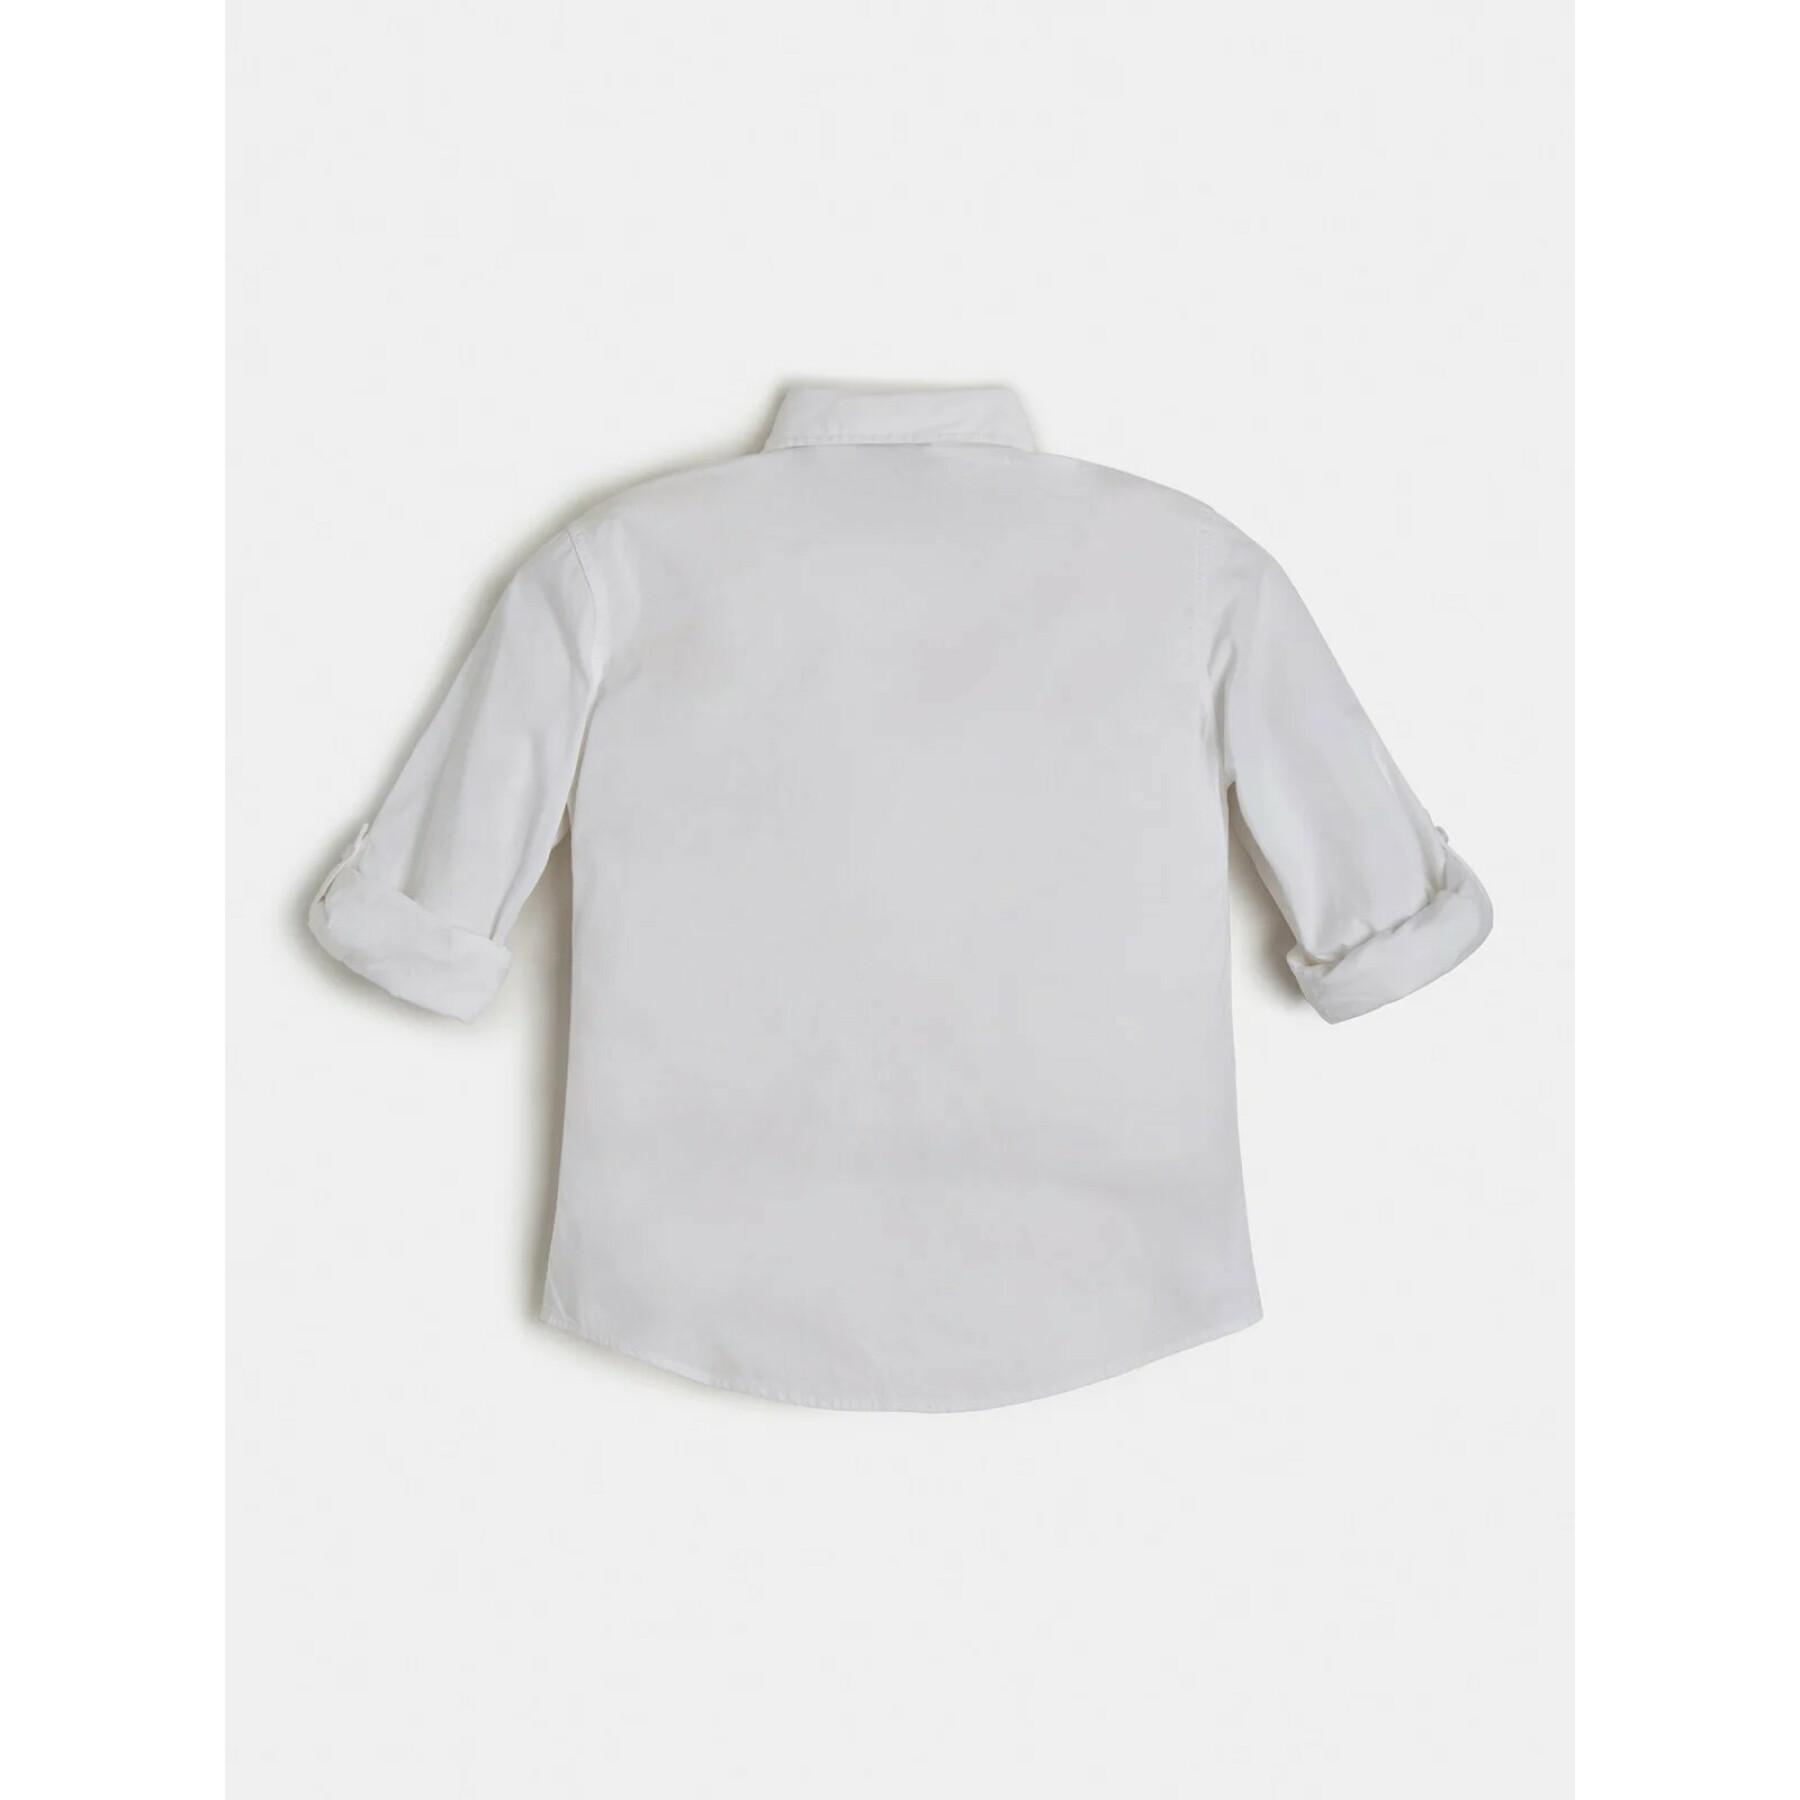 Adjustable shirt for children Guess Core